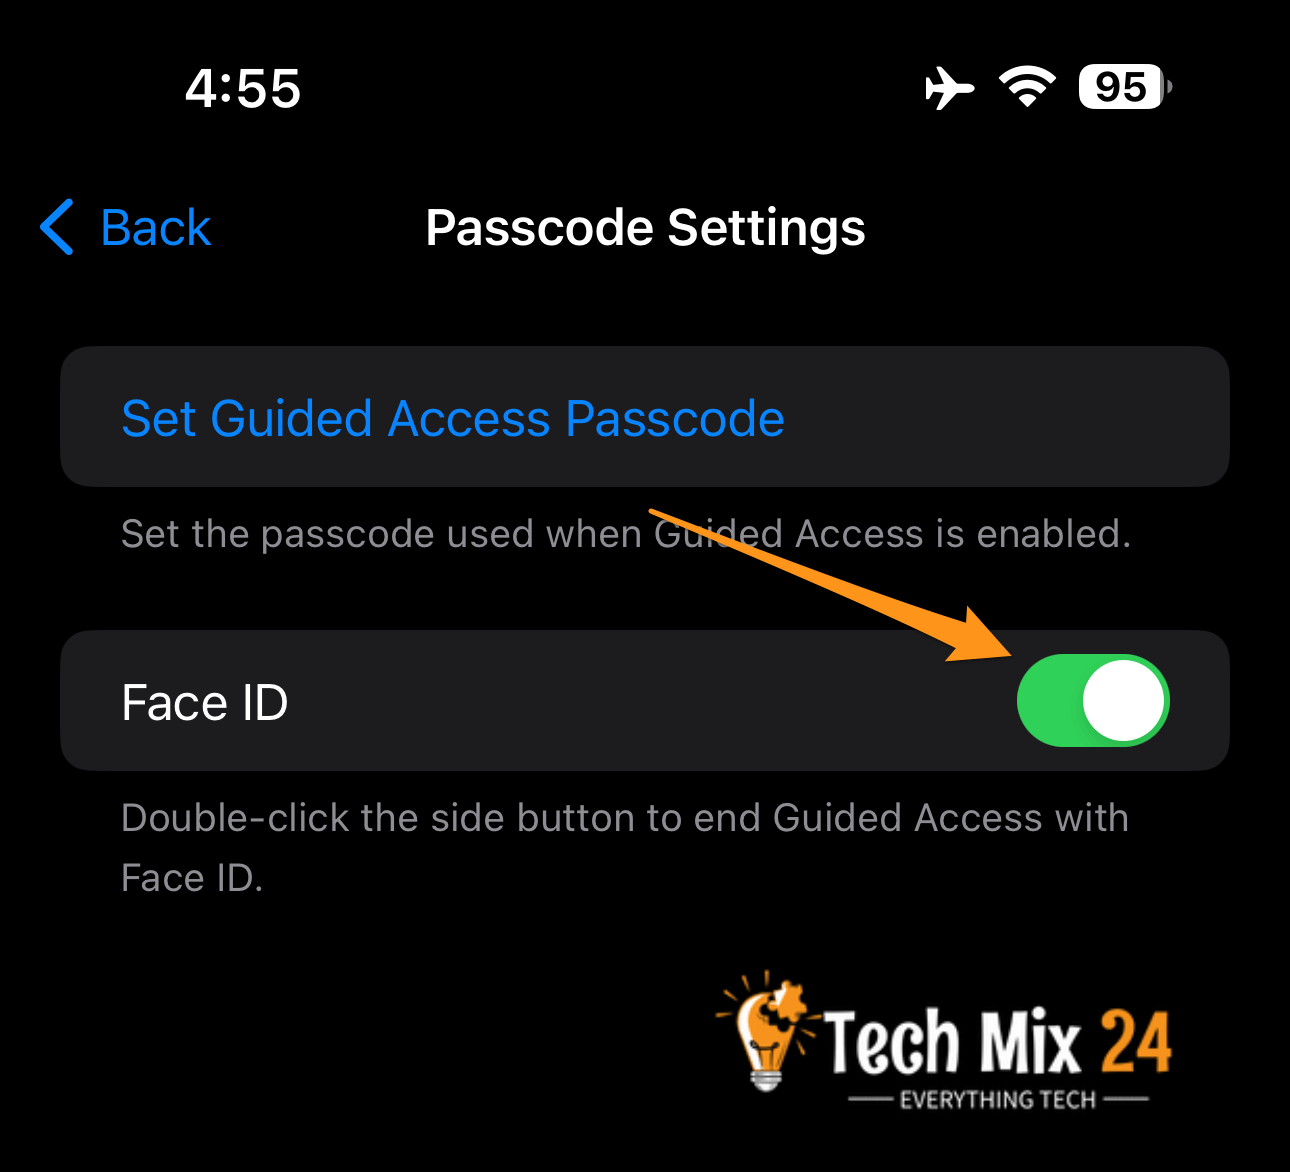 Enable Face ID